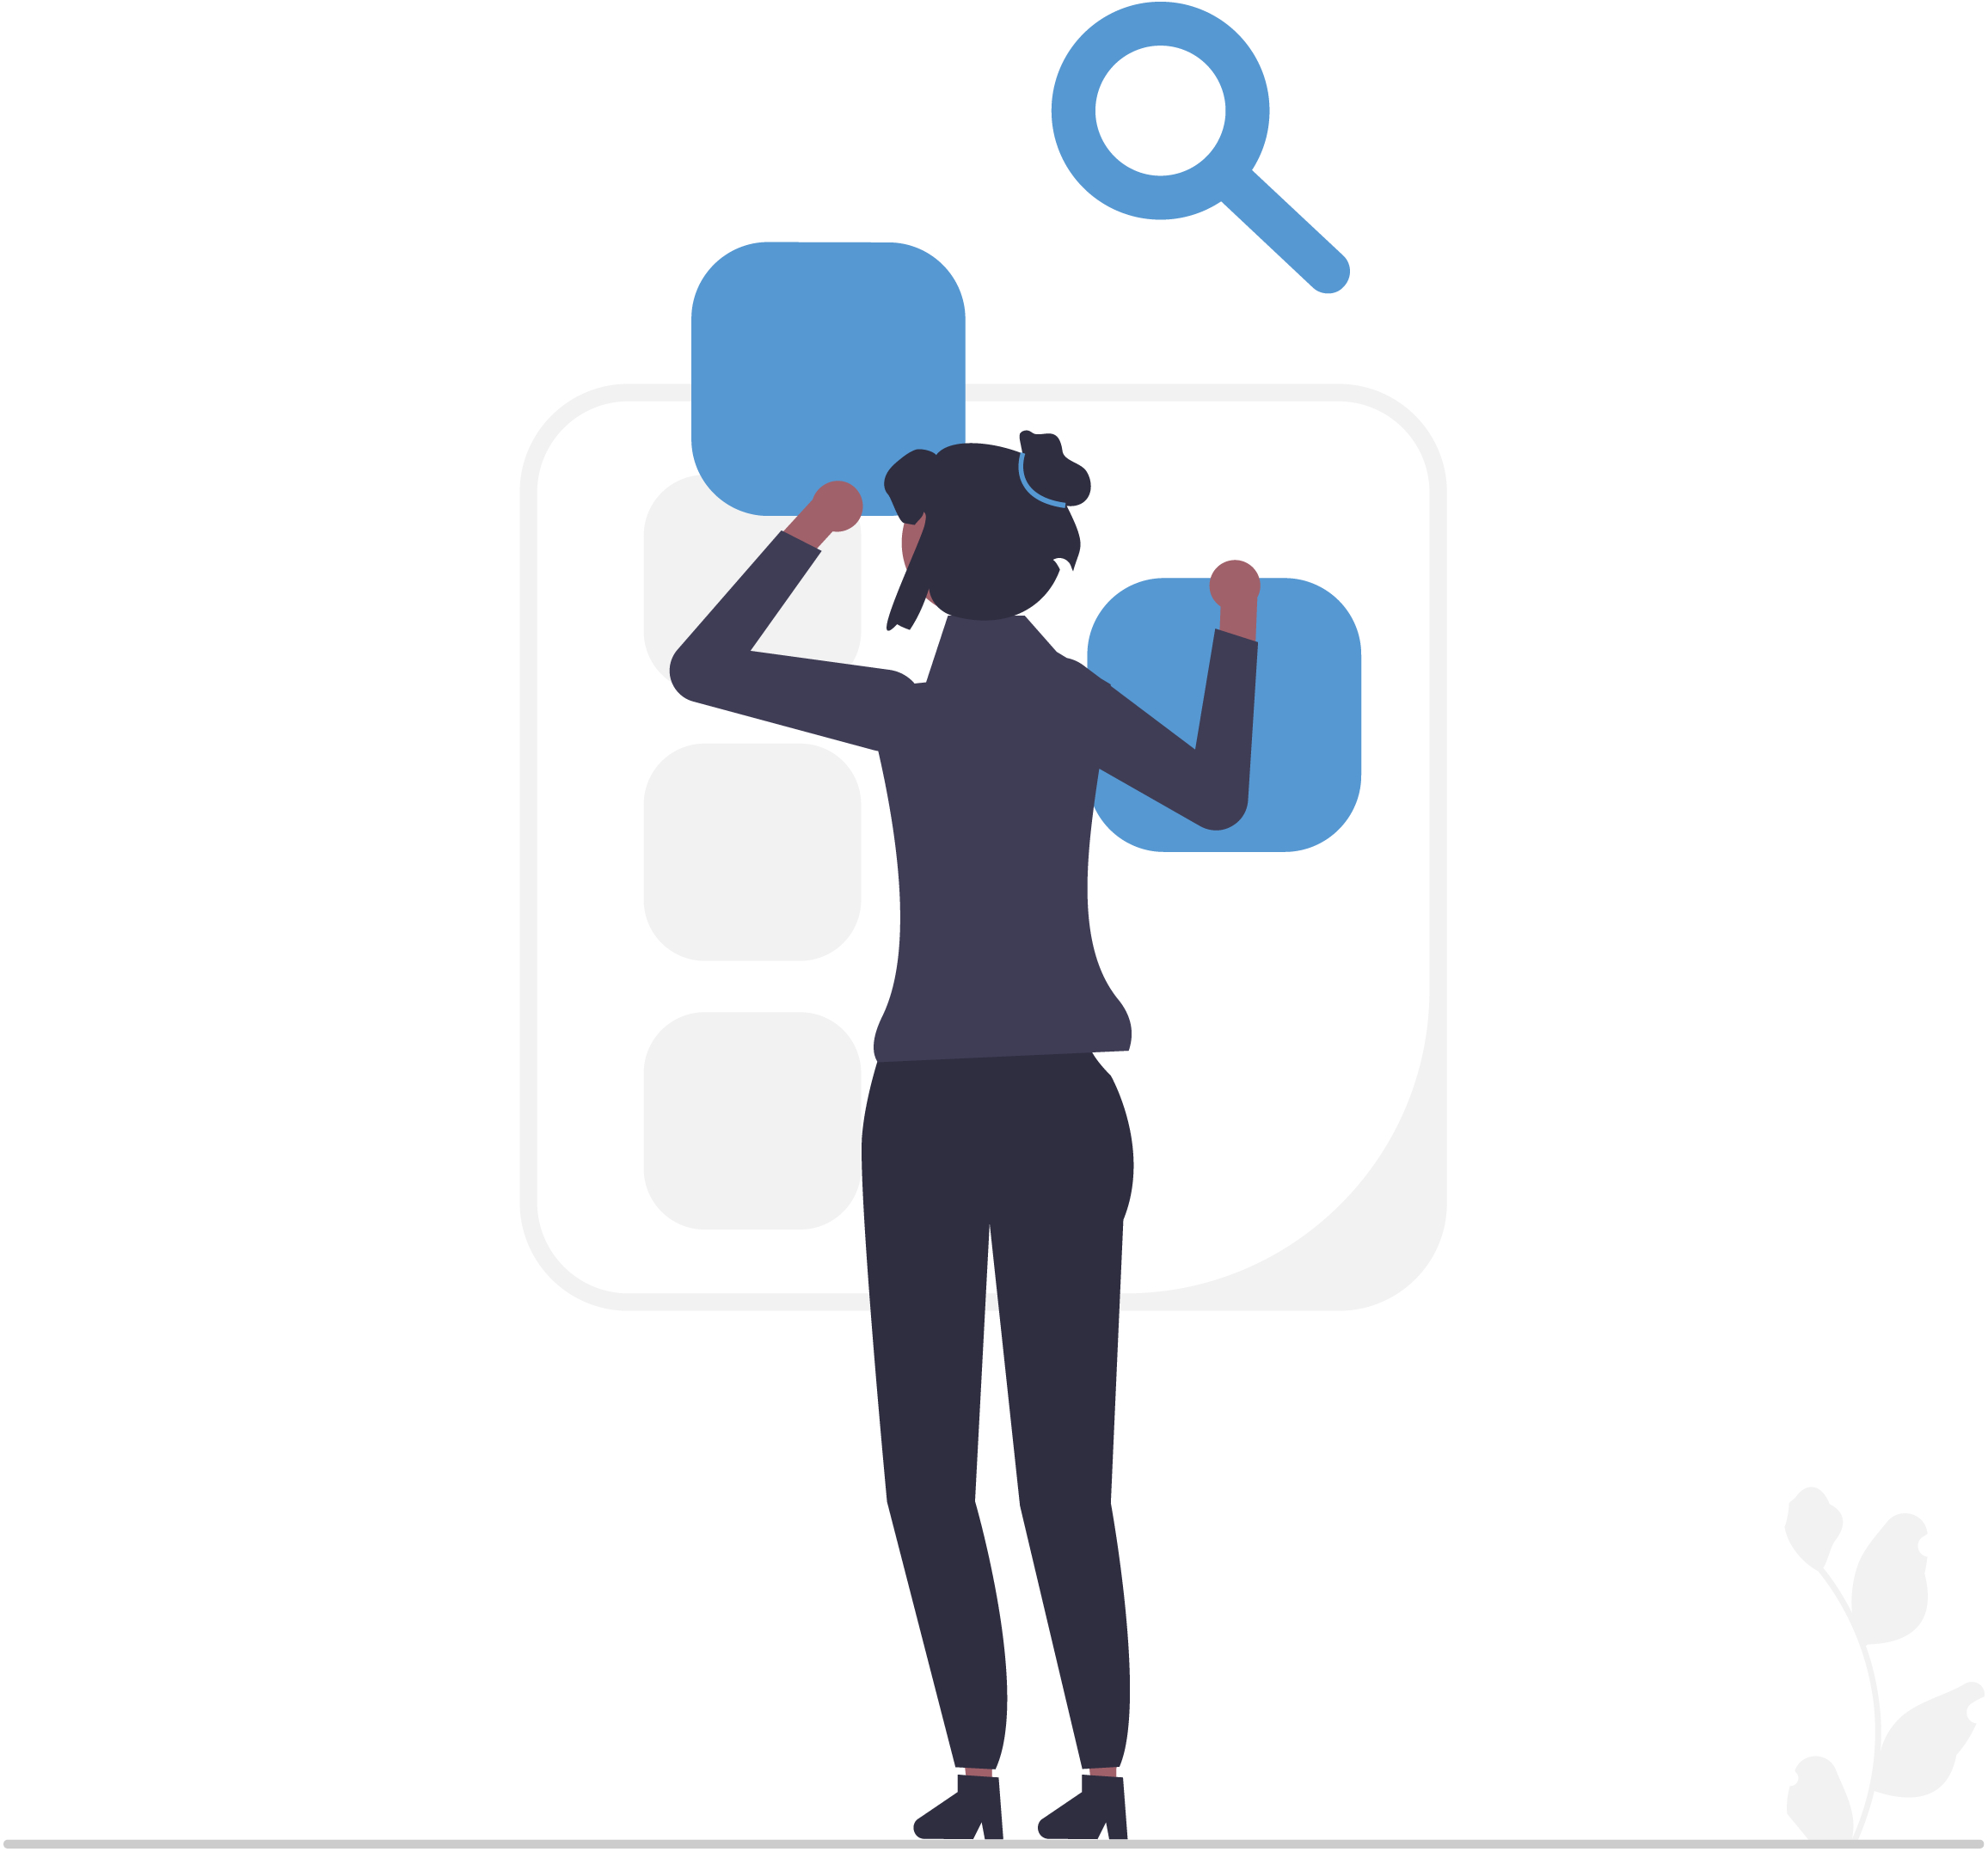 Illustration of a person searching for items on a small screen